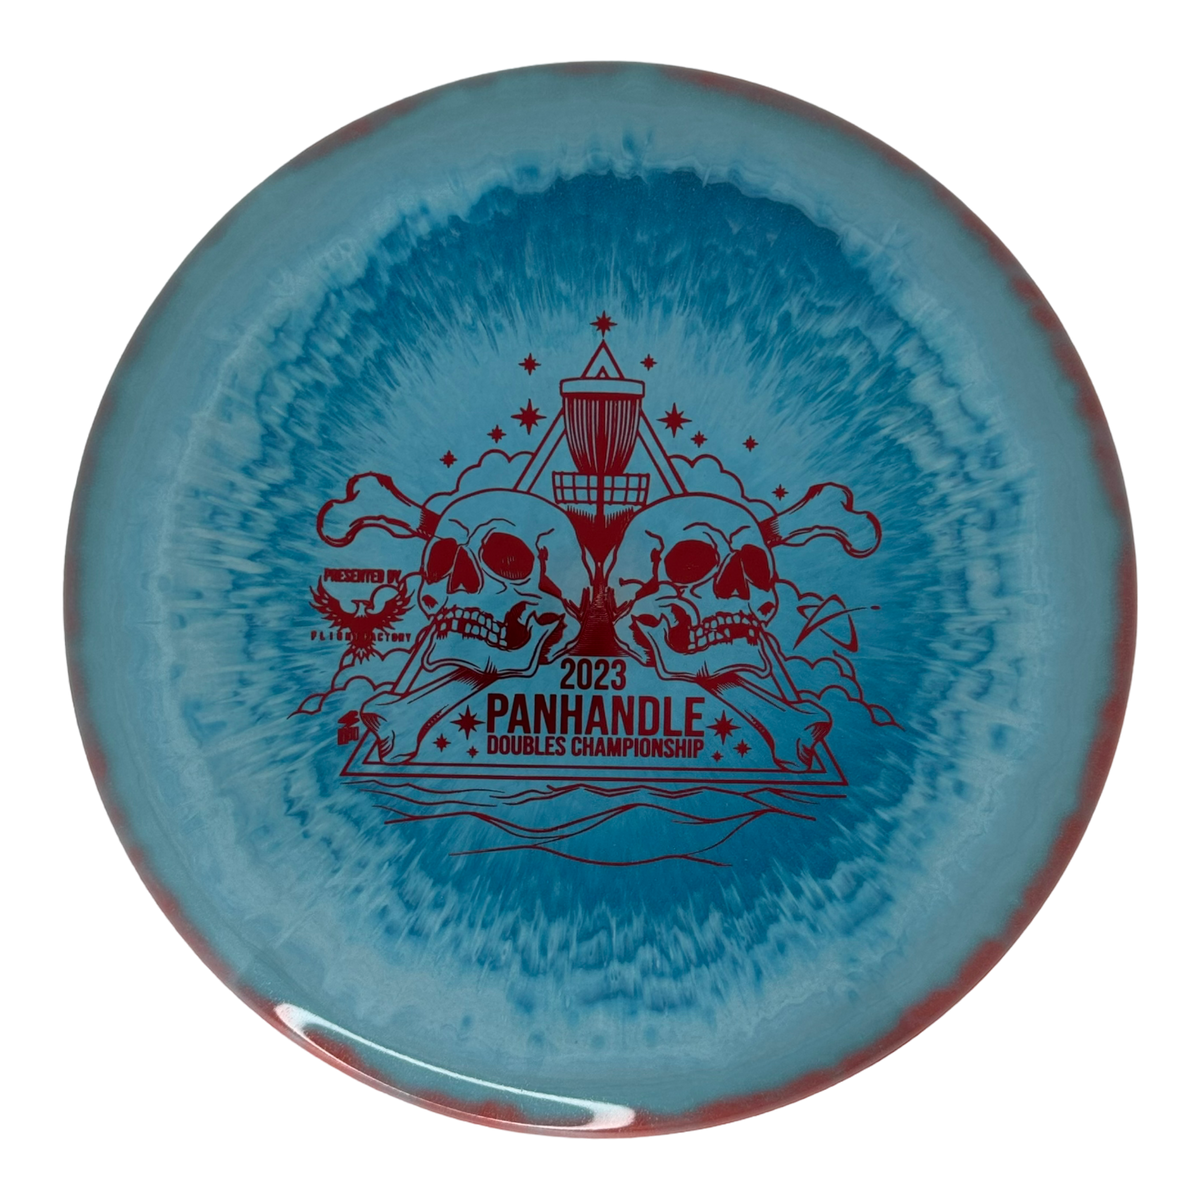 Prodigy 750 Glimmer M4 - 2023 Panhandle Doubles